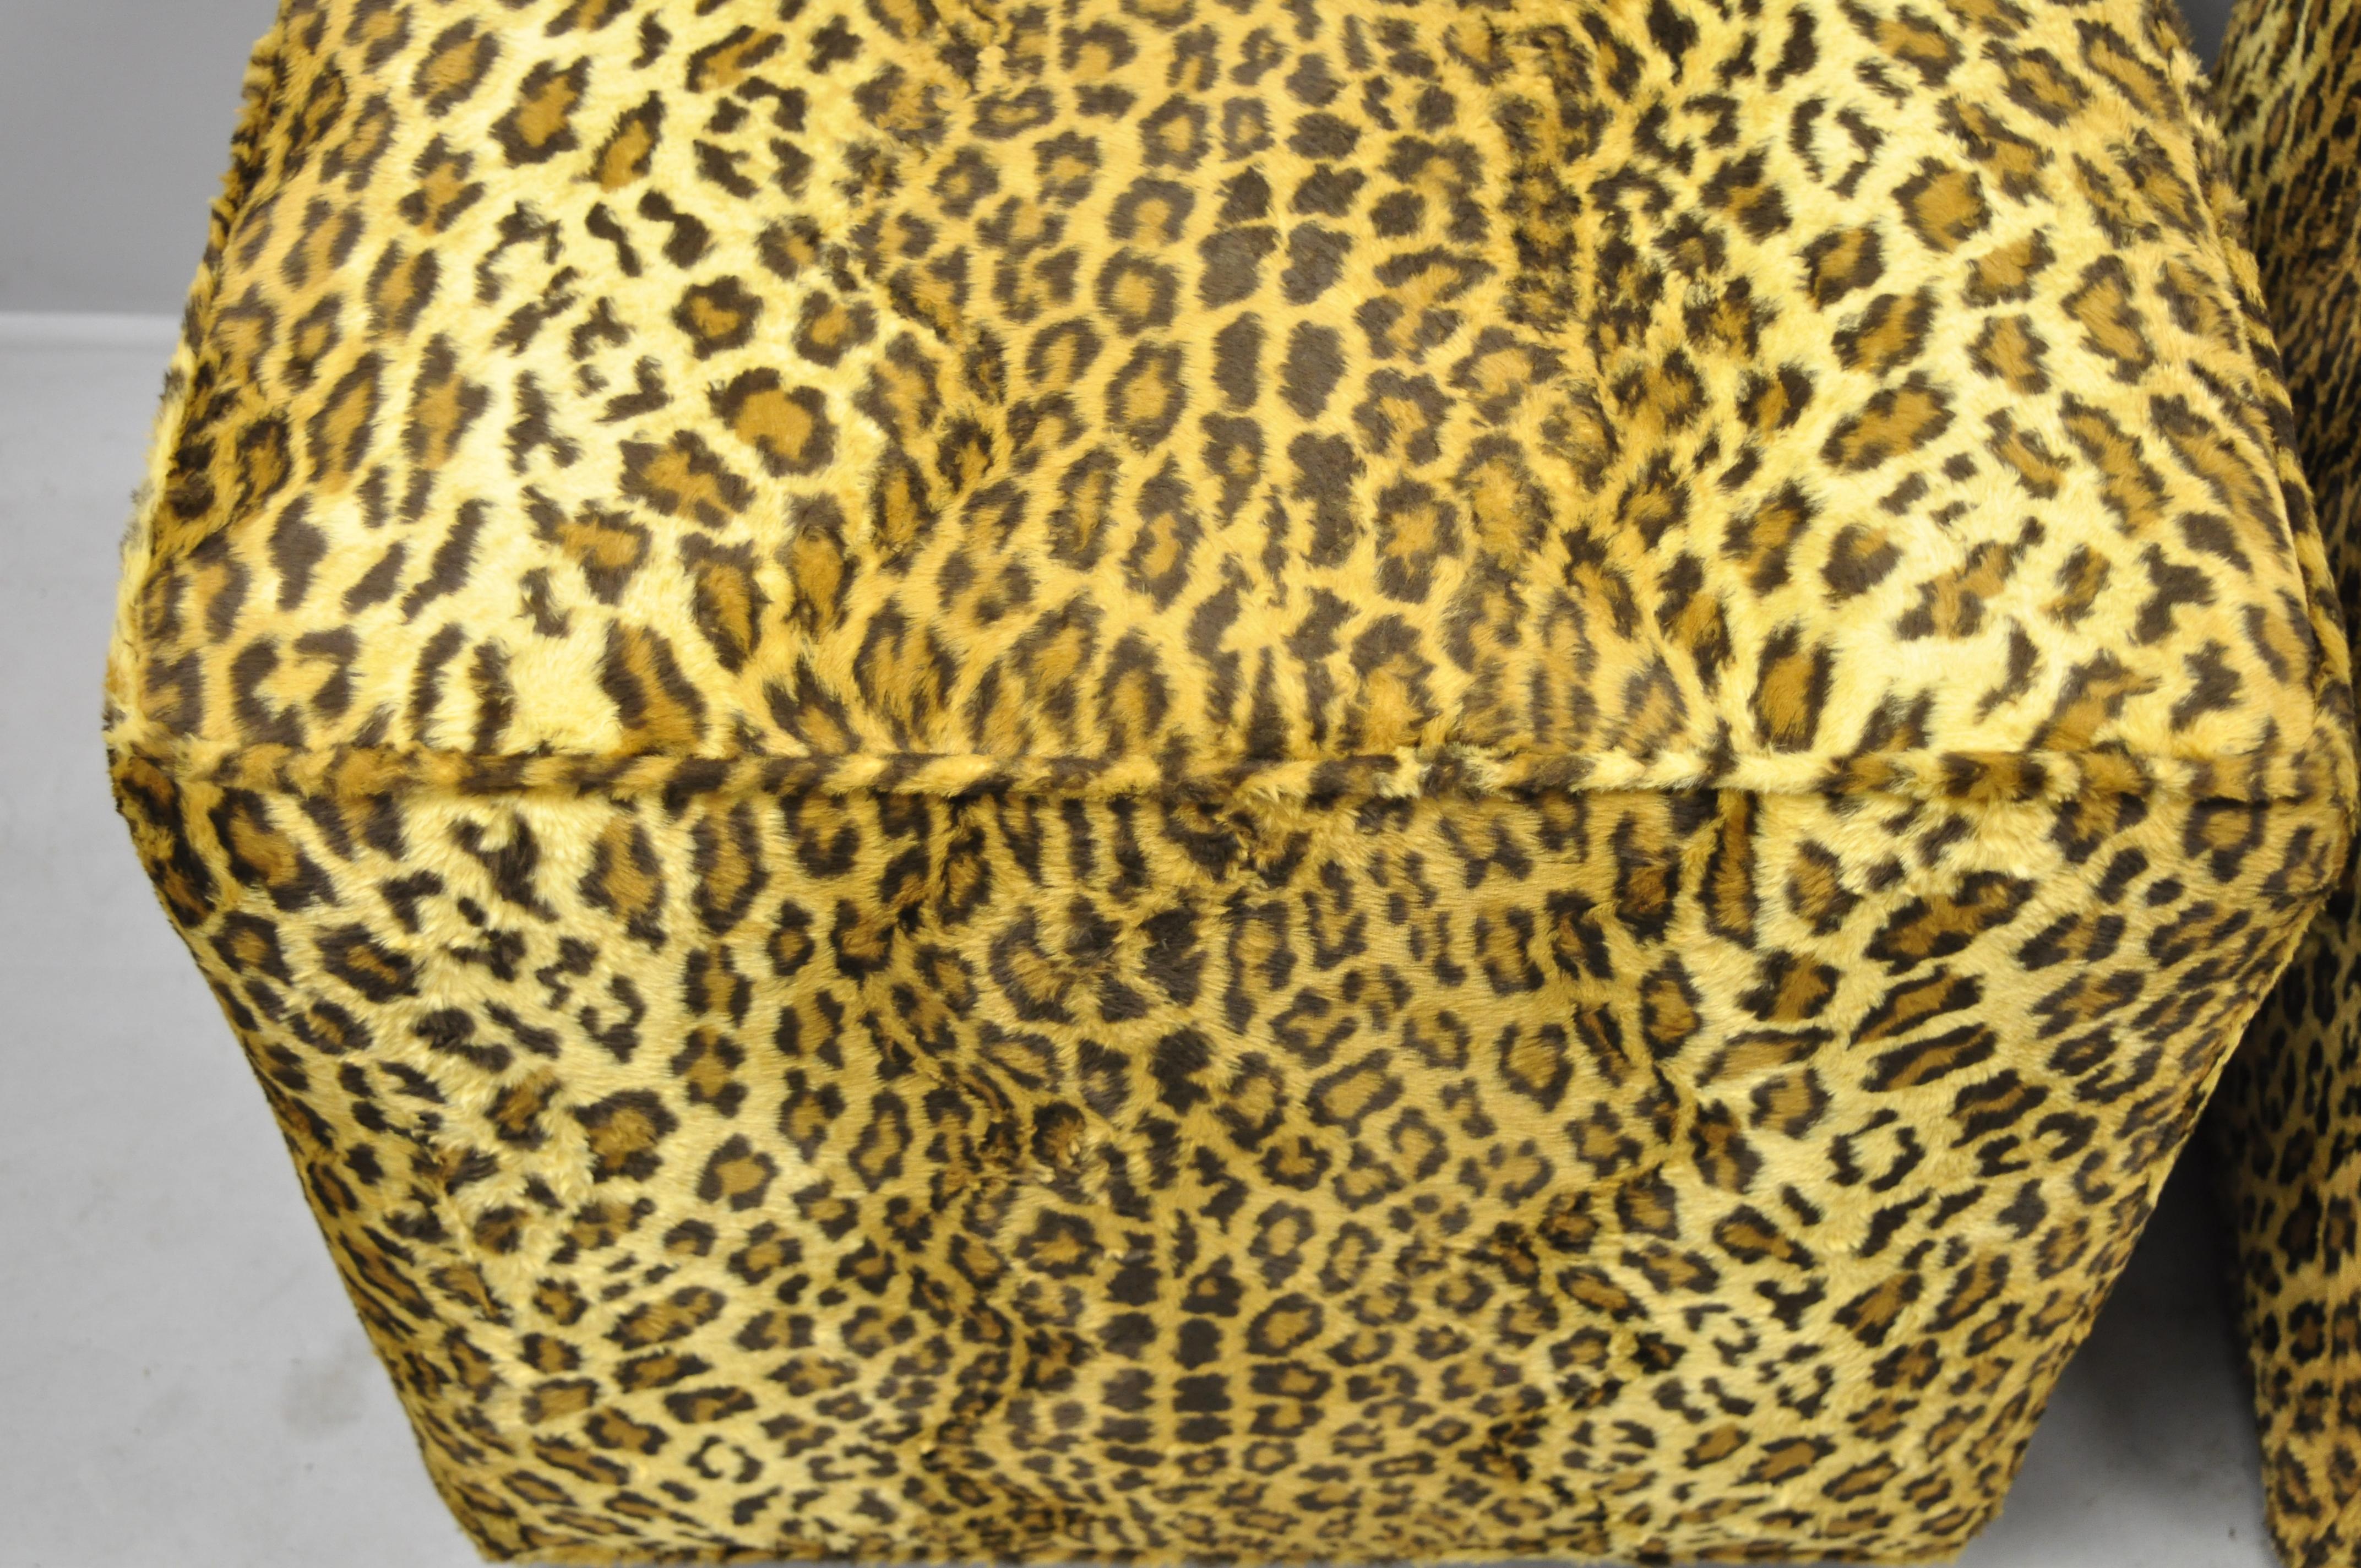 Hollywood Regency Pair of Colby Cube Ottoman Stools Leopard Cheetah Print Fabric by Barclay Butera